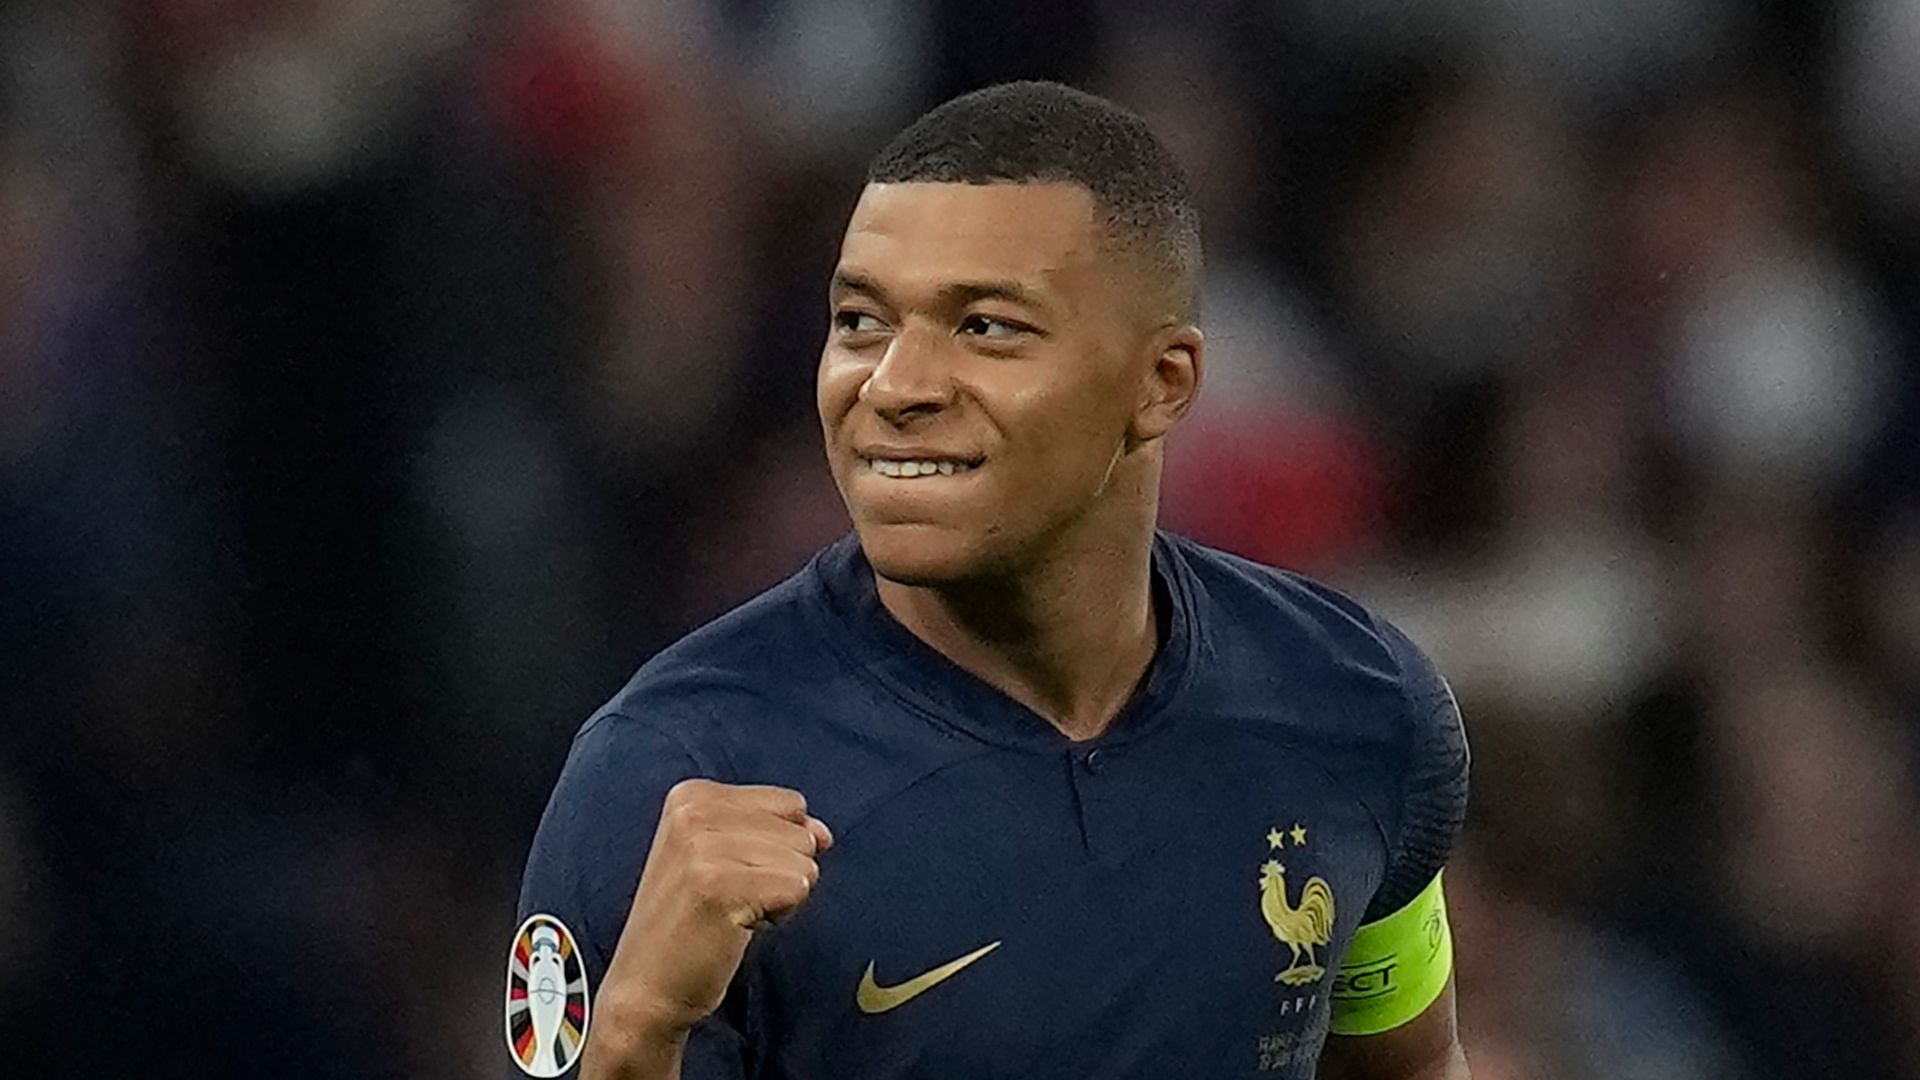 Mbappe warned PSG team-mates will be sold if he leaves for free next summer